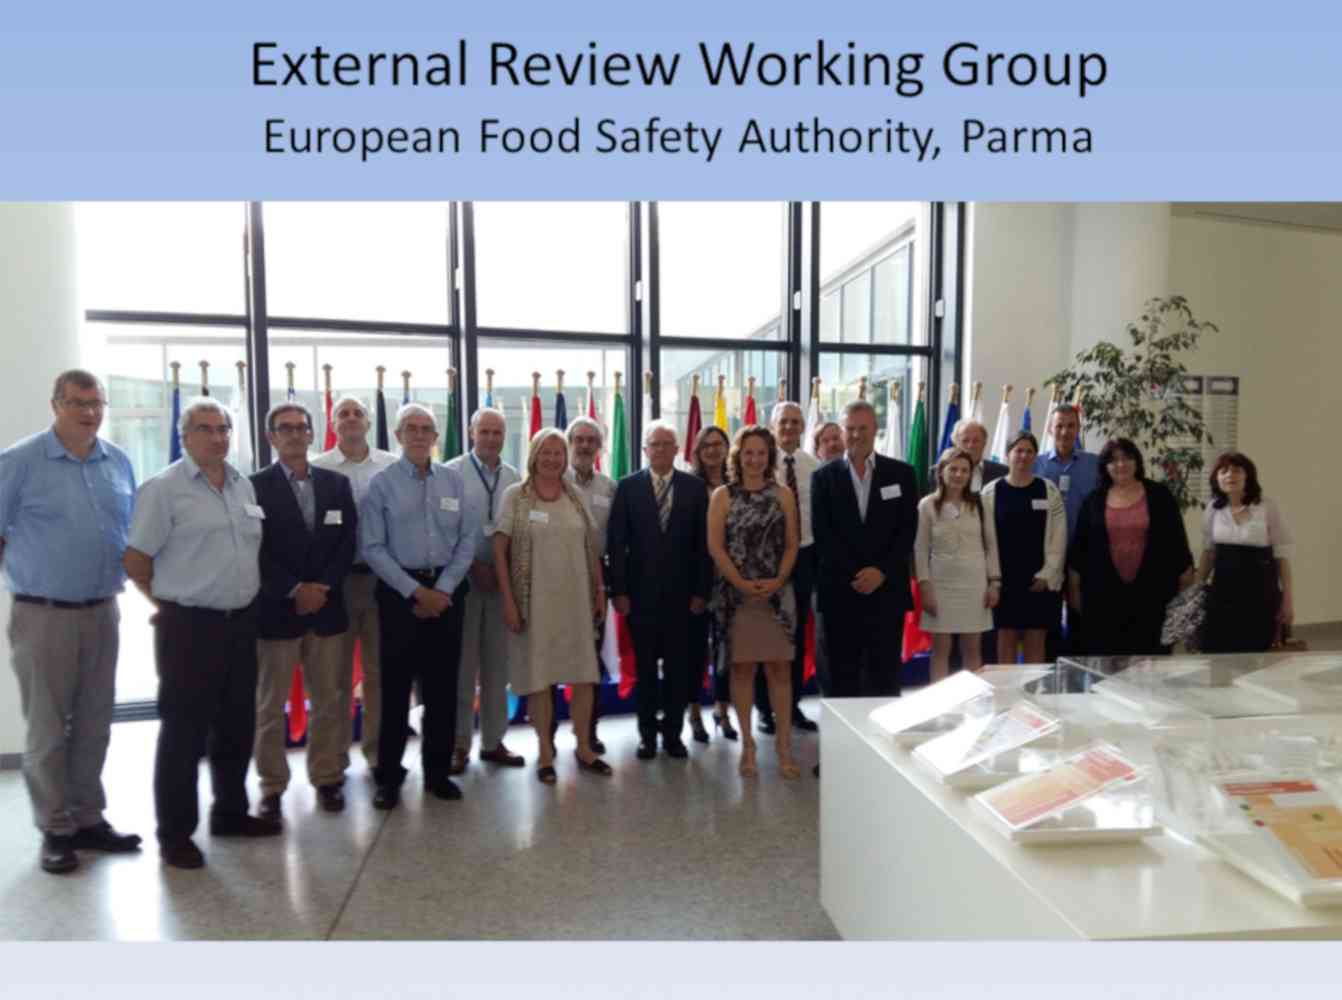 External Review Working Group for the European Food Safety Authority - ERWG Meeting at Parma